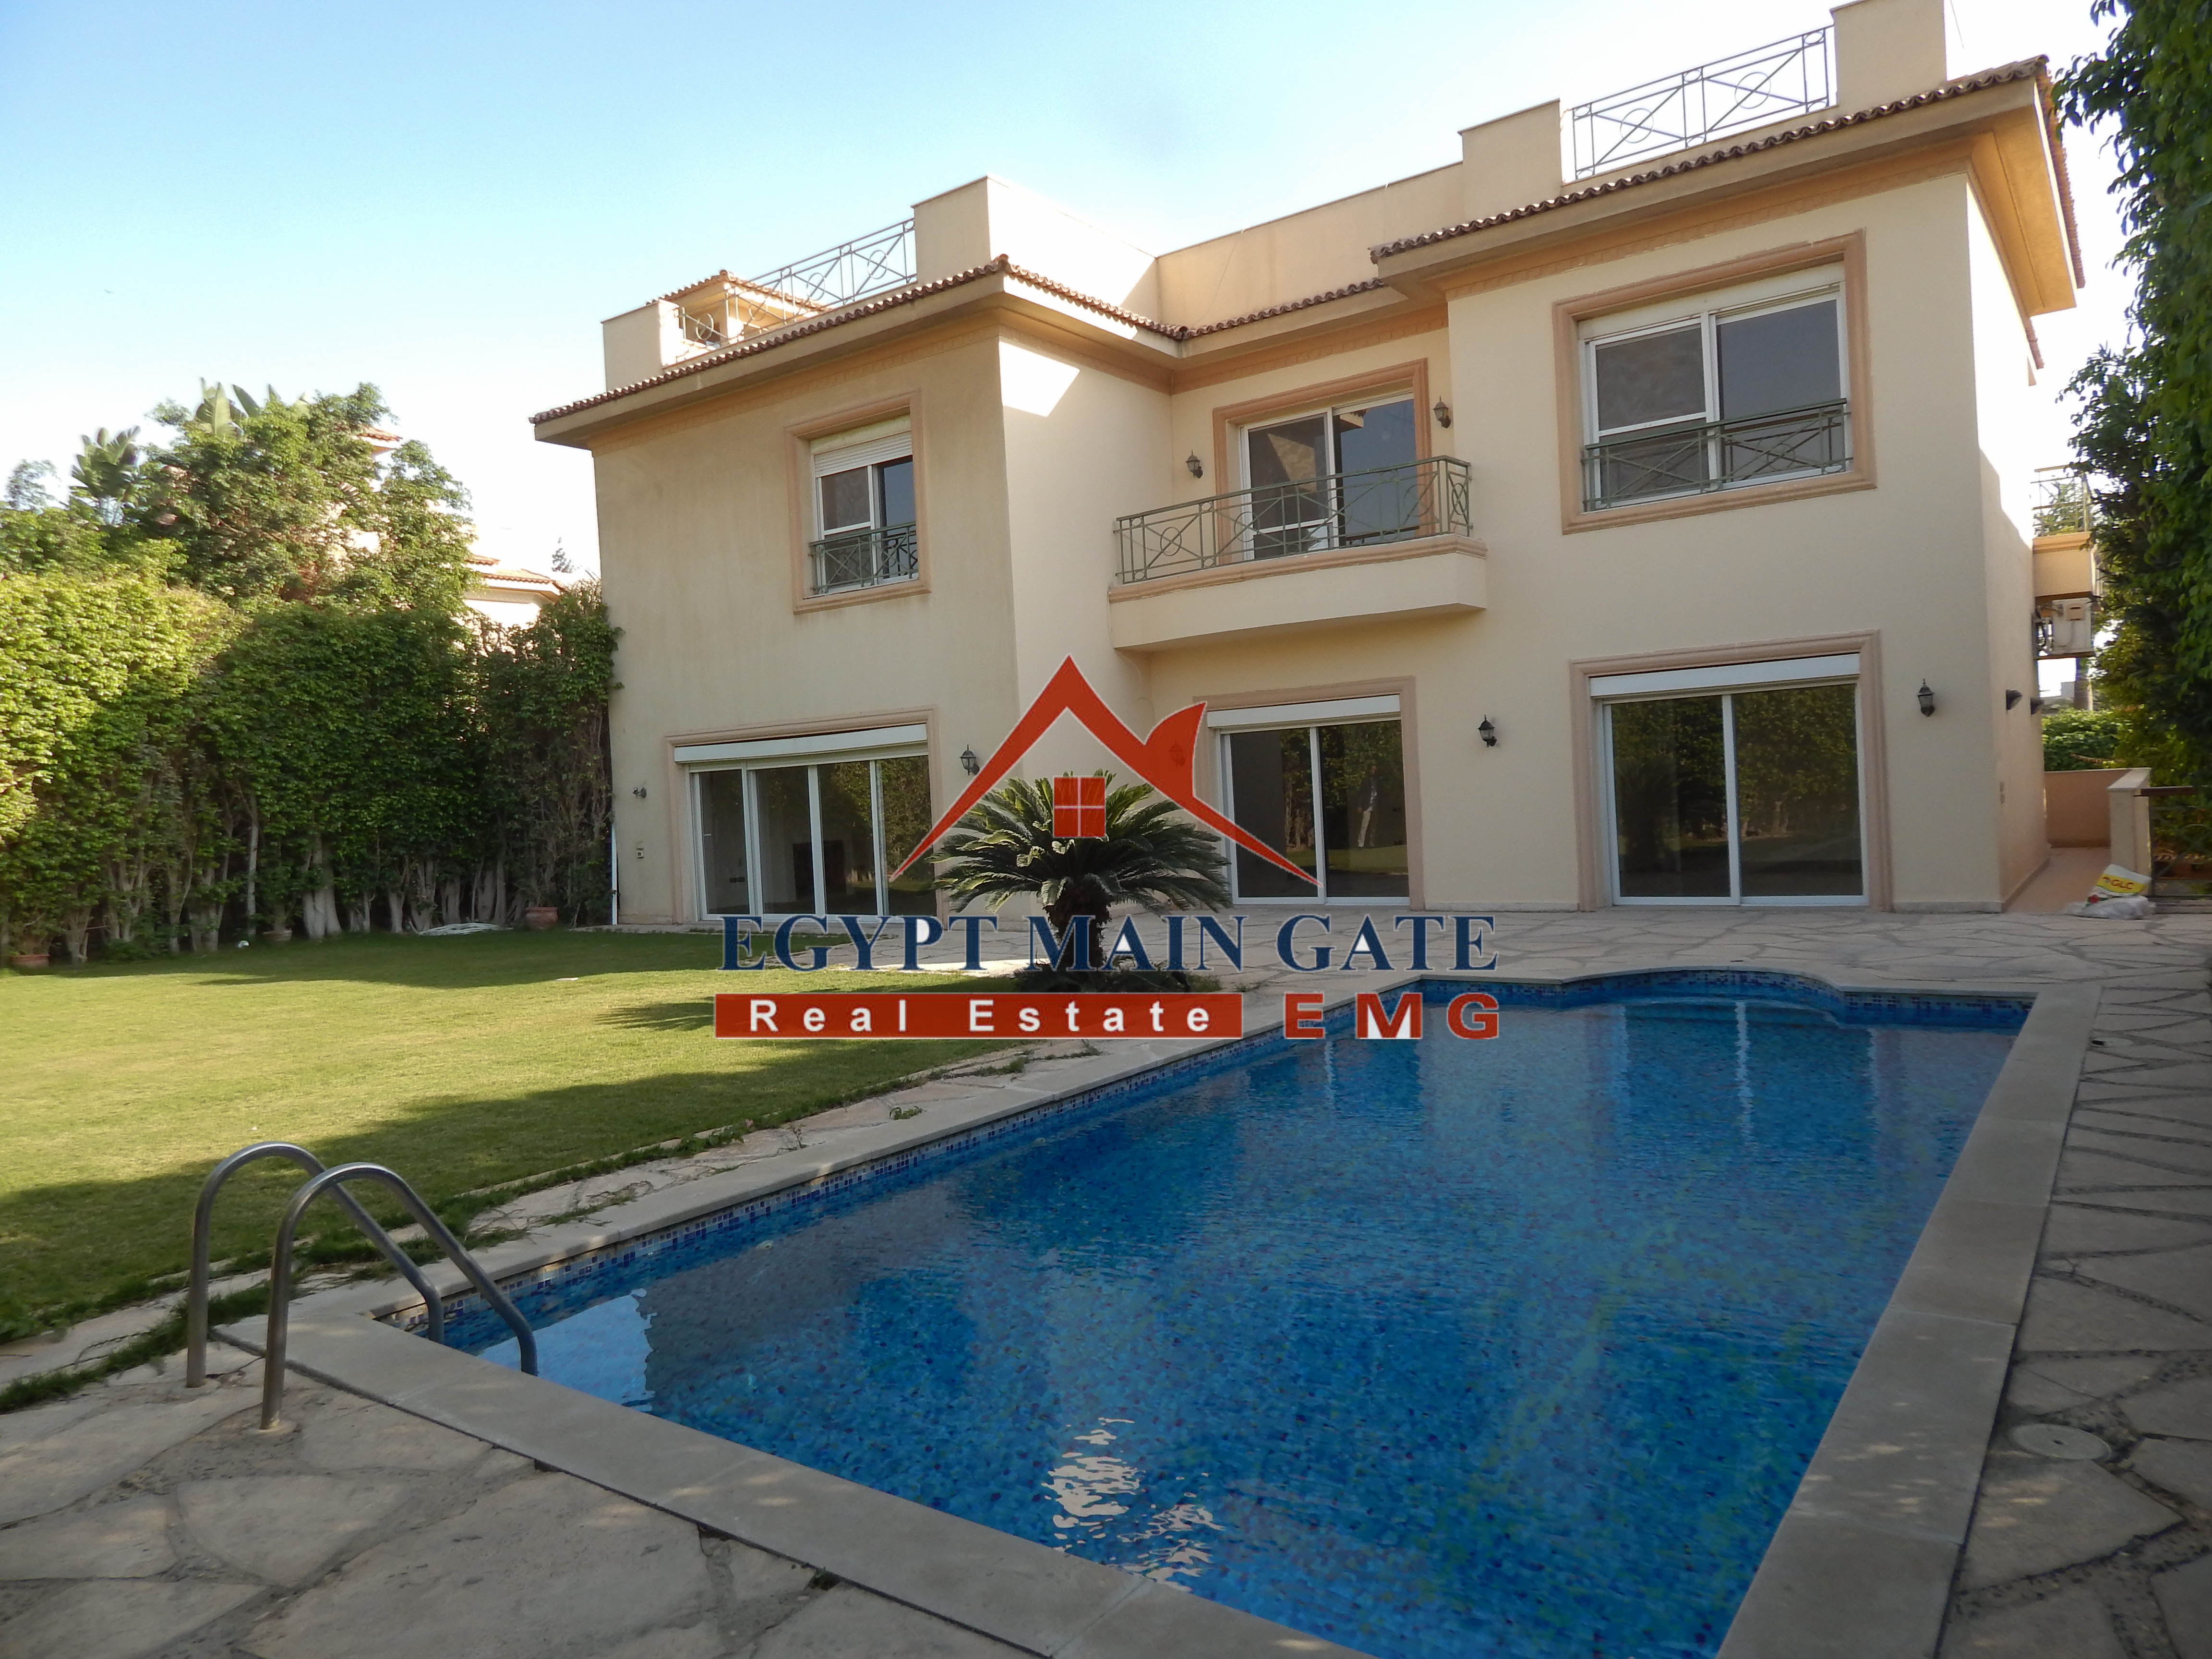 Villa for Sale with nice garden and a lovely pool